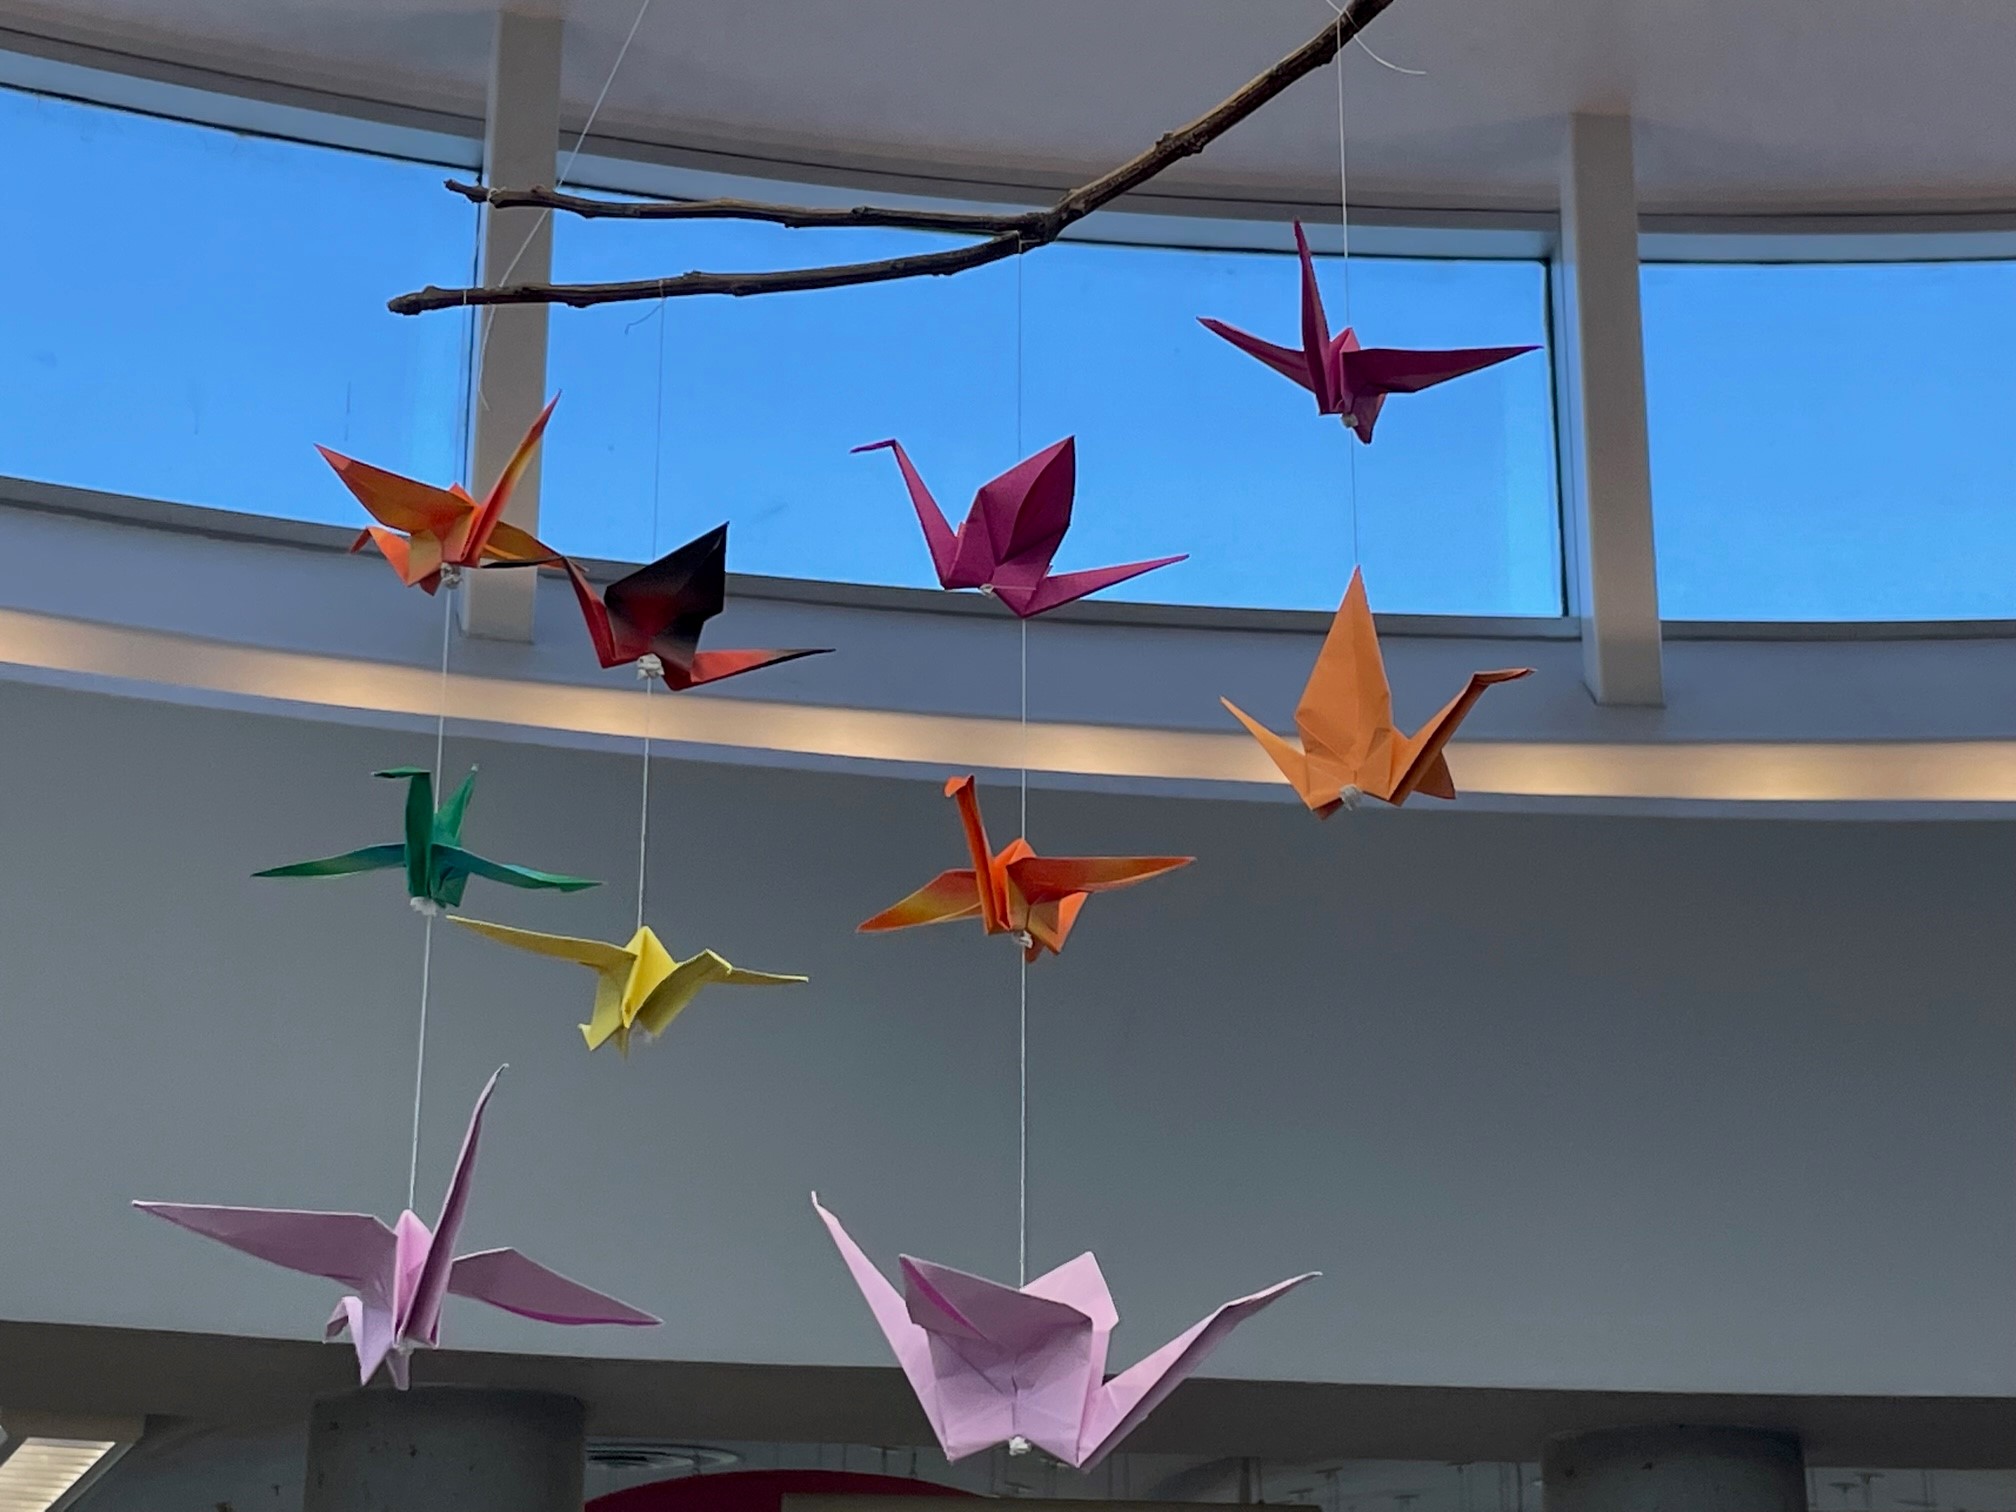 Mobile made of origami cranes hanging from a branch